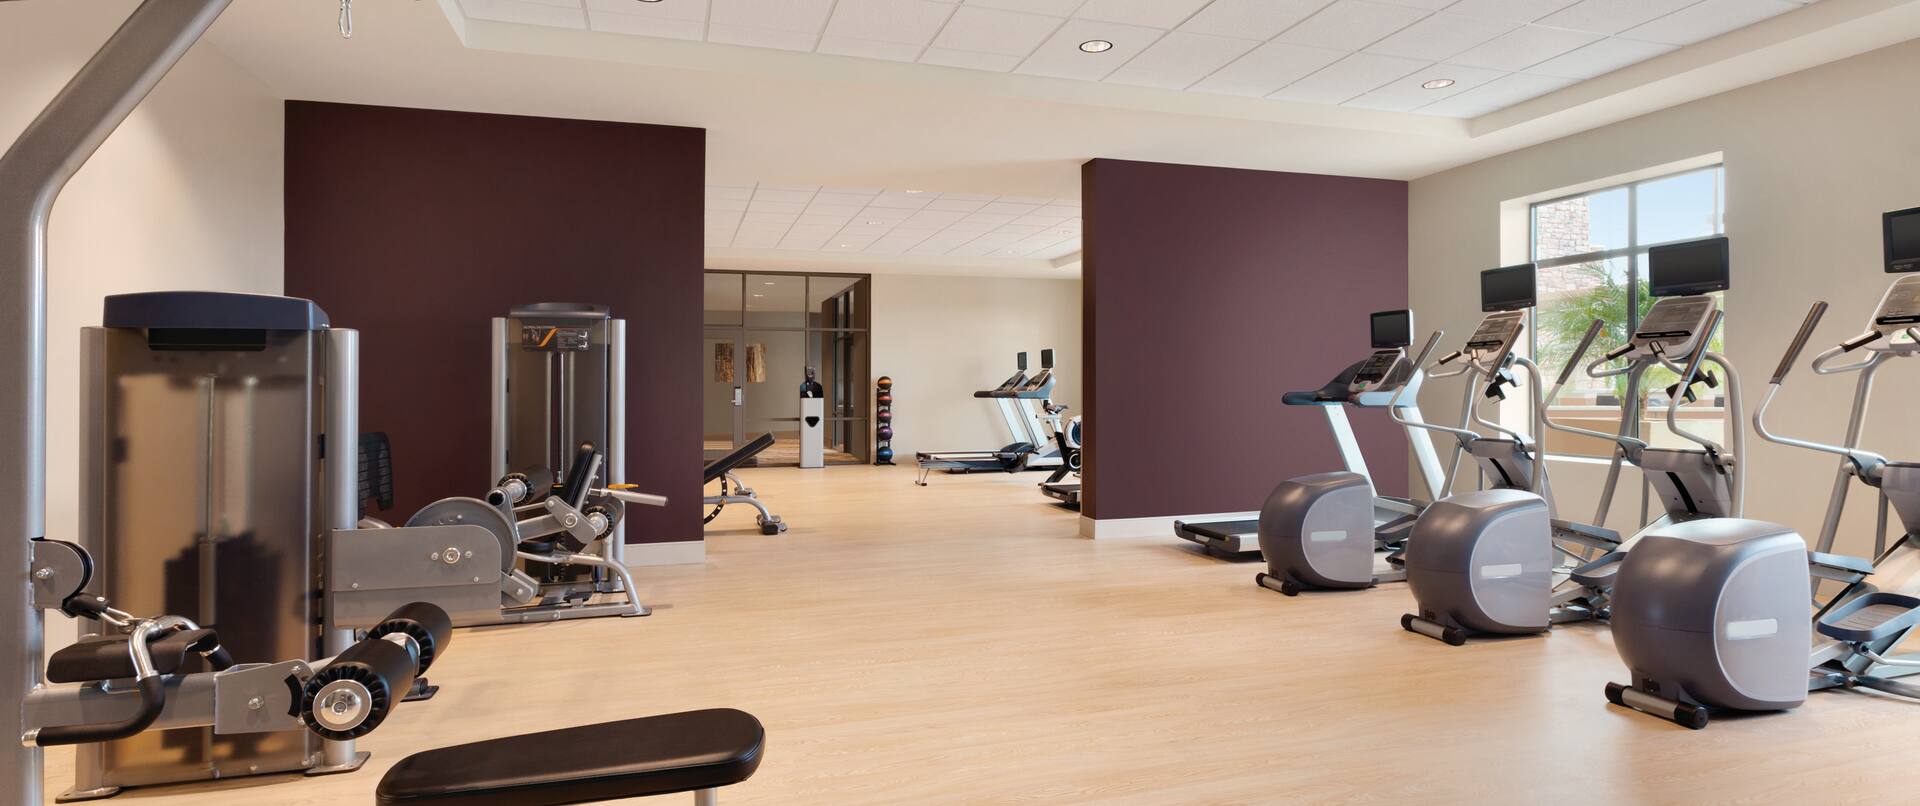 Fitness Center with Cross-Trainers and Weight Machines